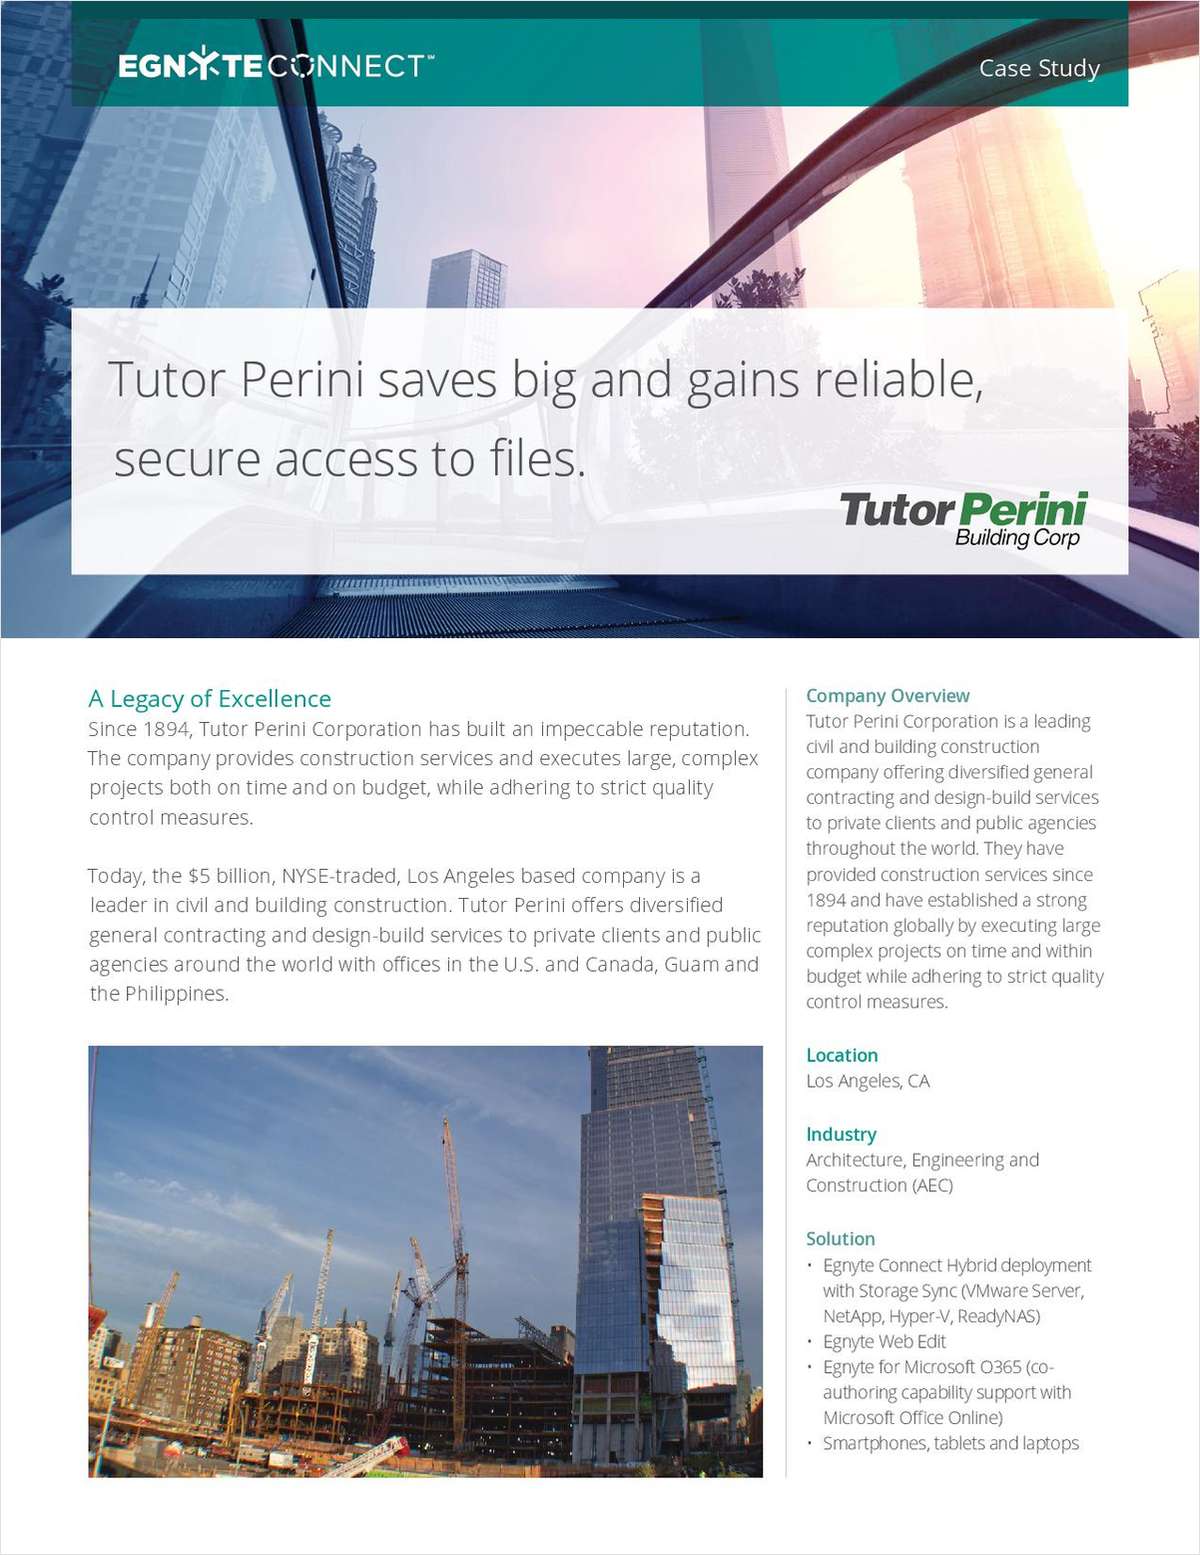 Tutor Perini Saves Big and Gains Reliable, Secure Access to Files